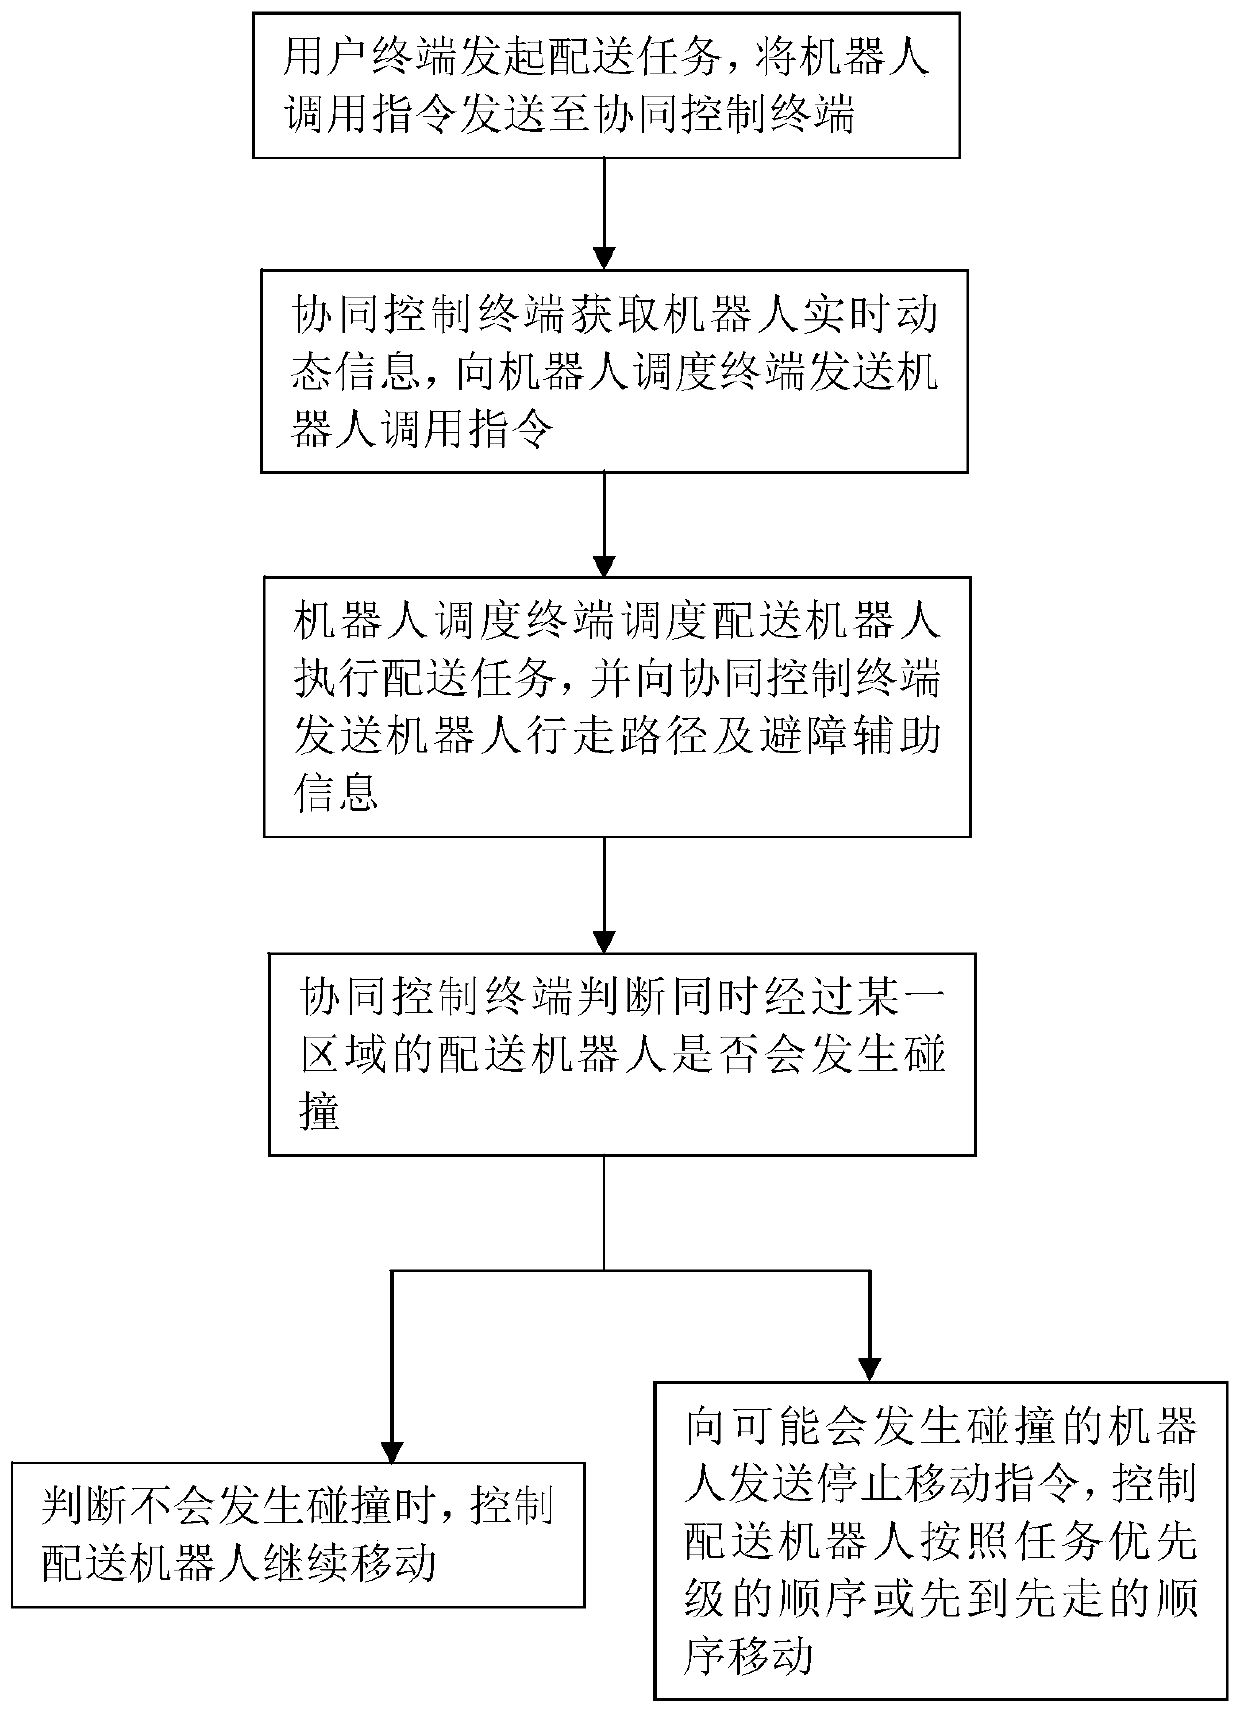 Mobile cooperative control system and control method of distribution robots